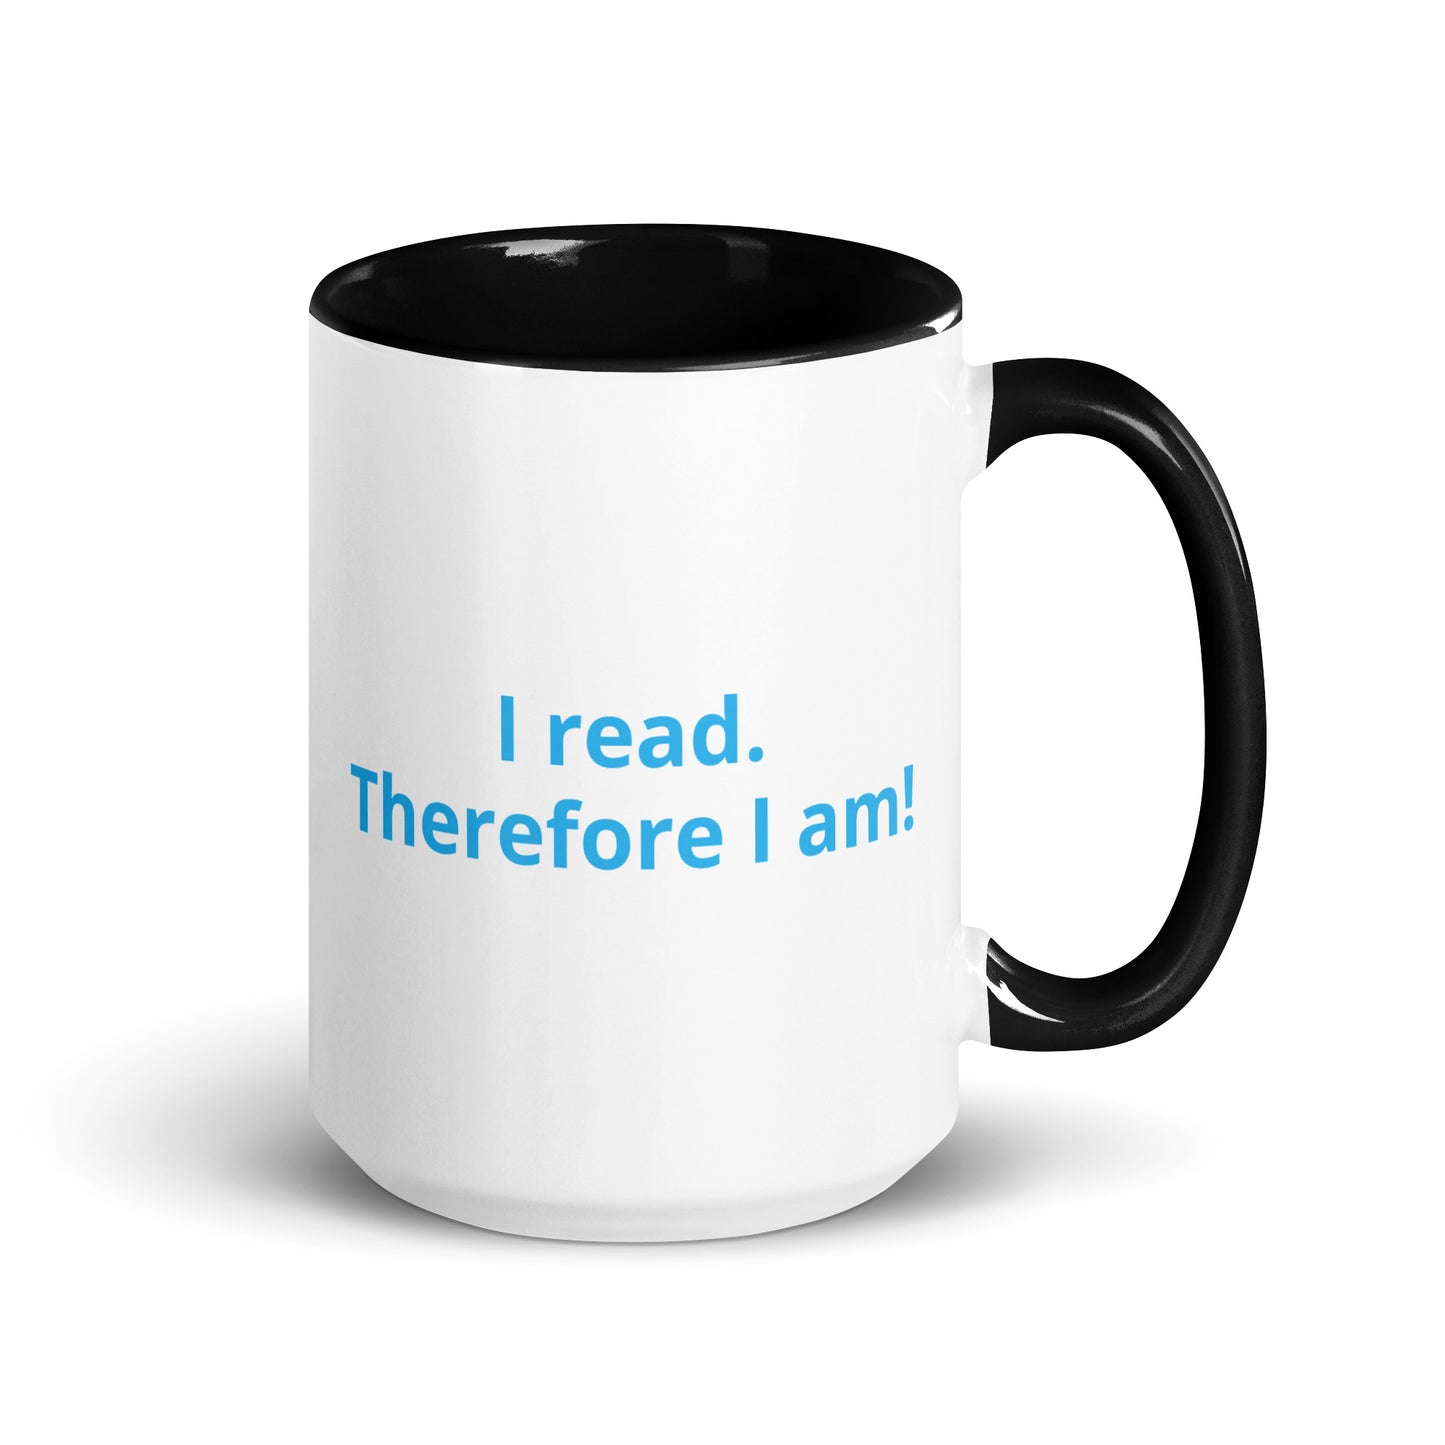 I read. Therefore I am!